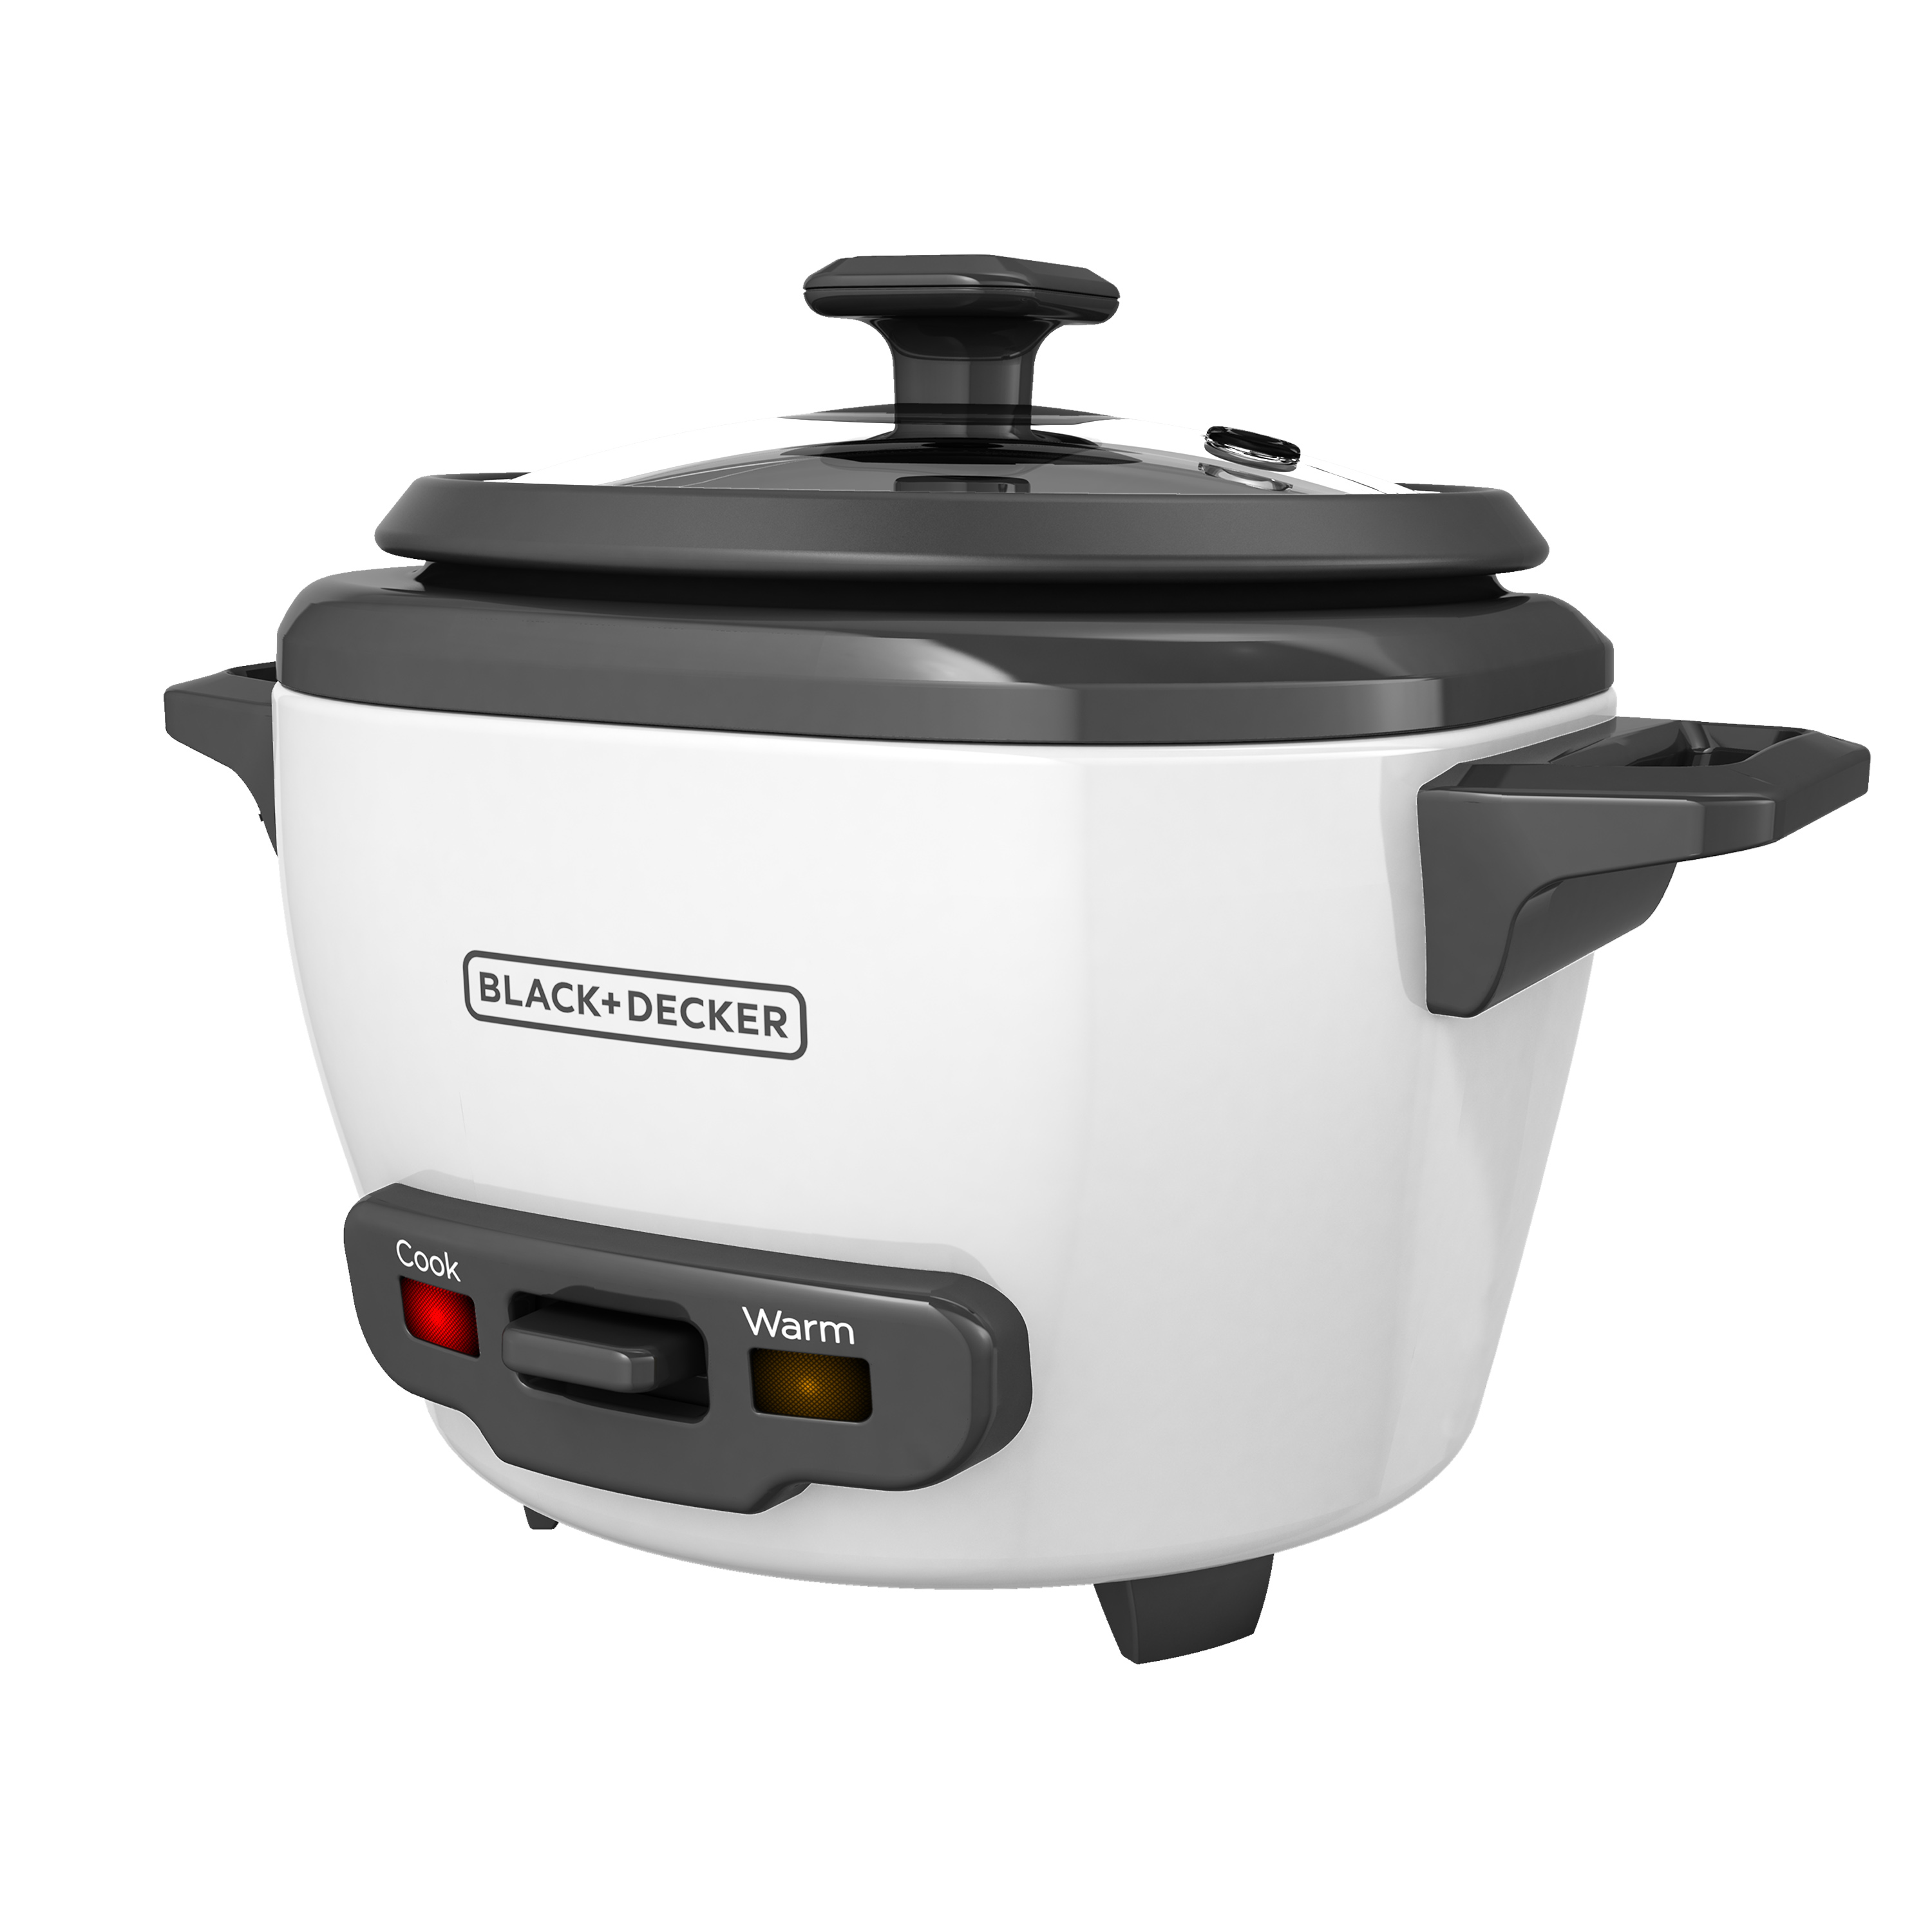 BLACK+DECKER 3-Cup Electric Rice Cooker with Keep-Warm Function, White, RC503 - image 1 of 7